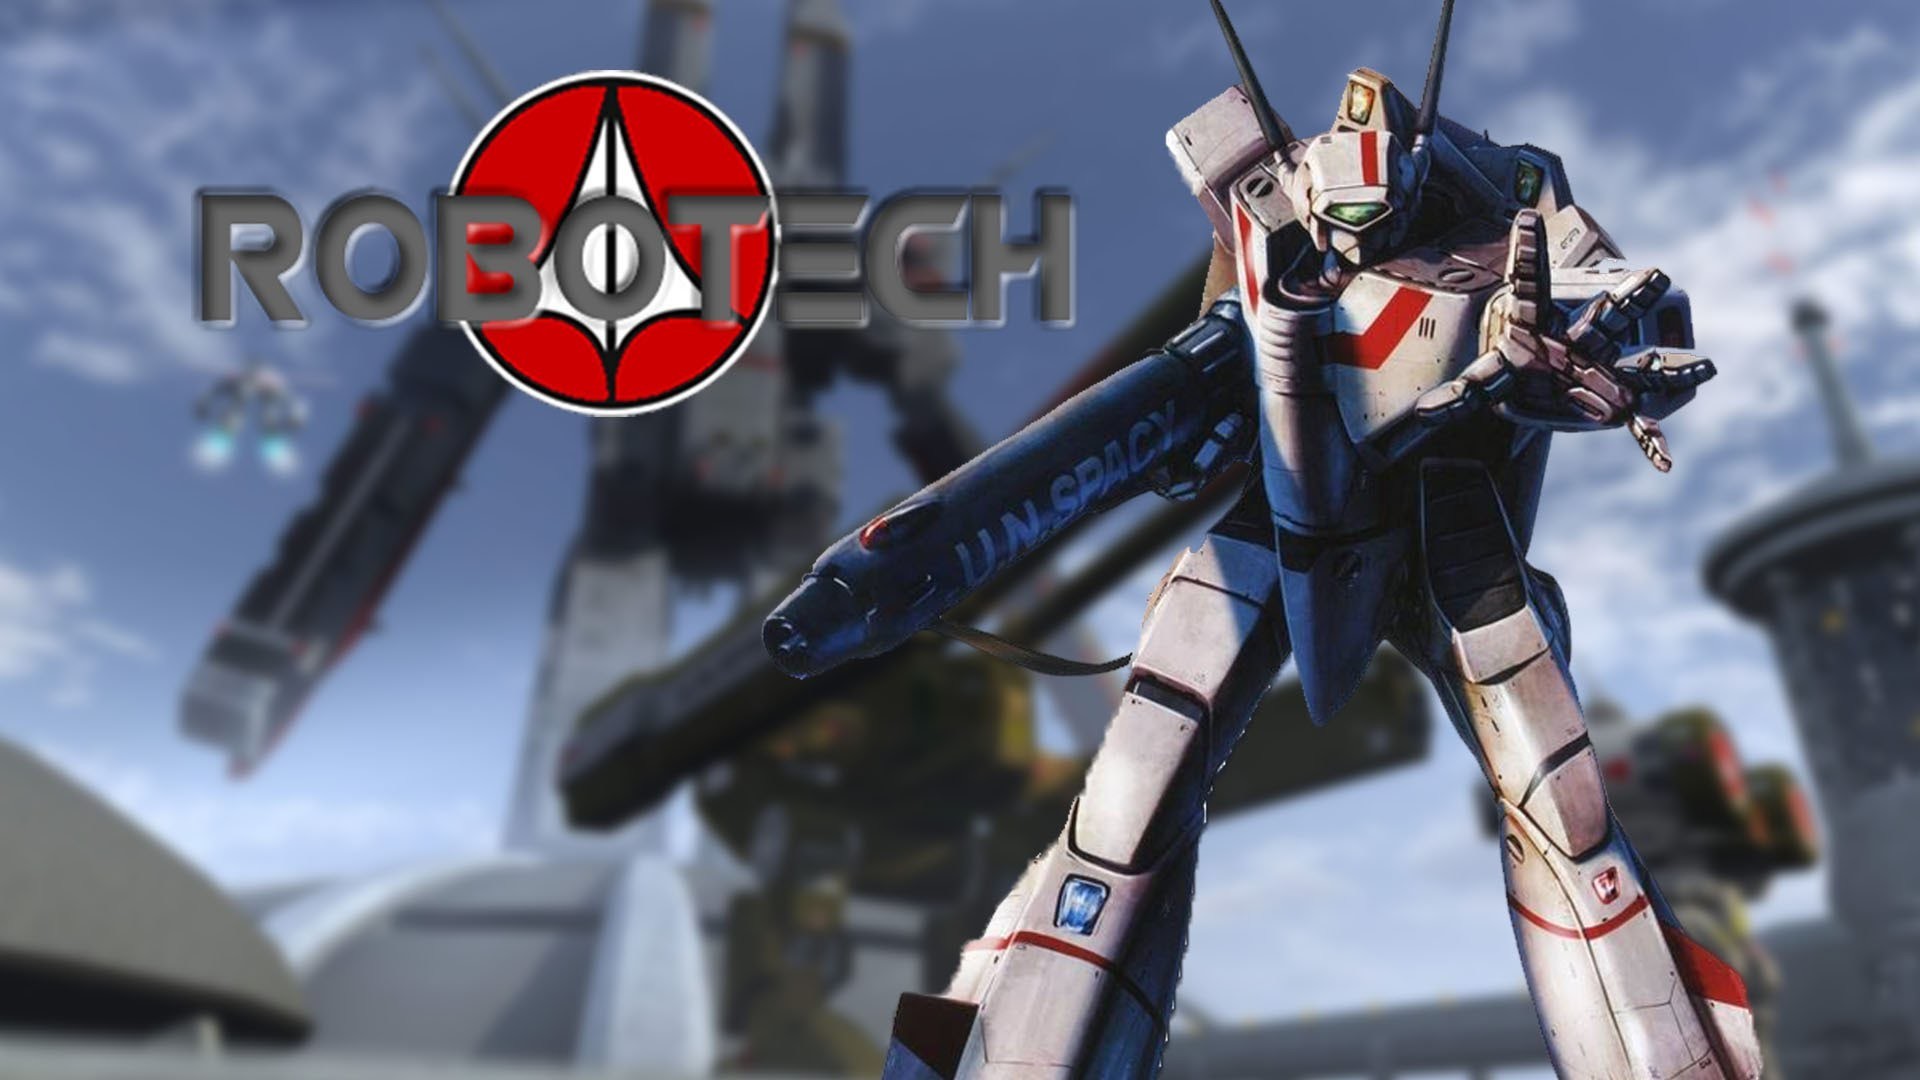 1920x1080  Robotech y Macross wallpapers | Posts, Aliens and Supernatural